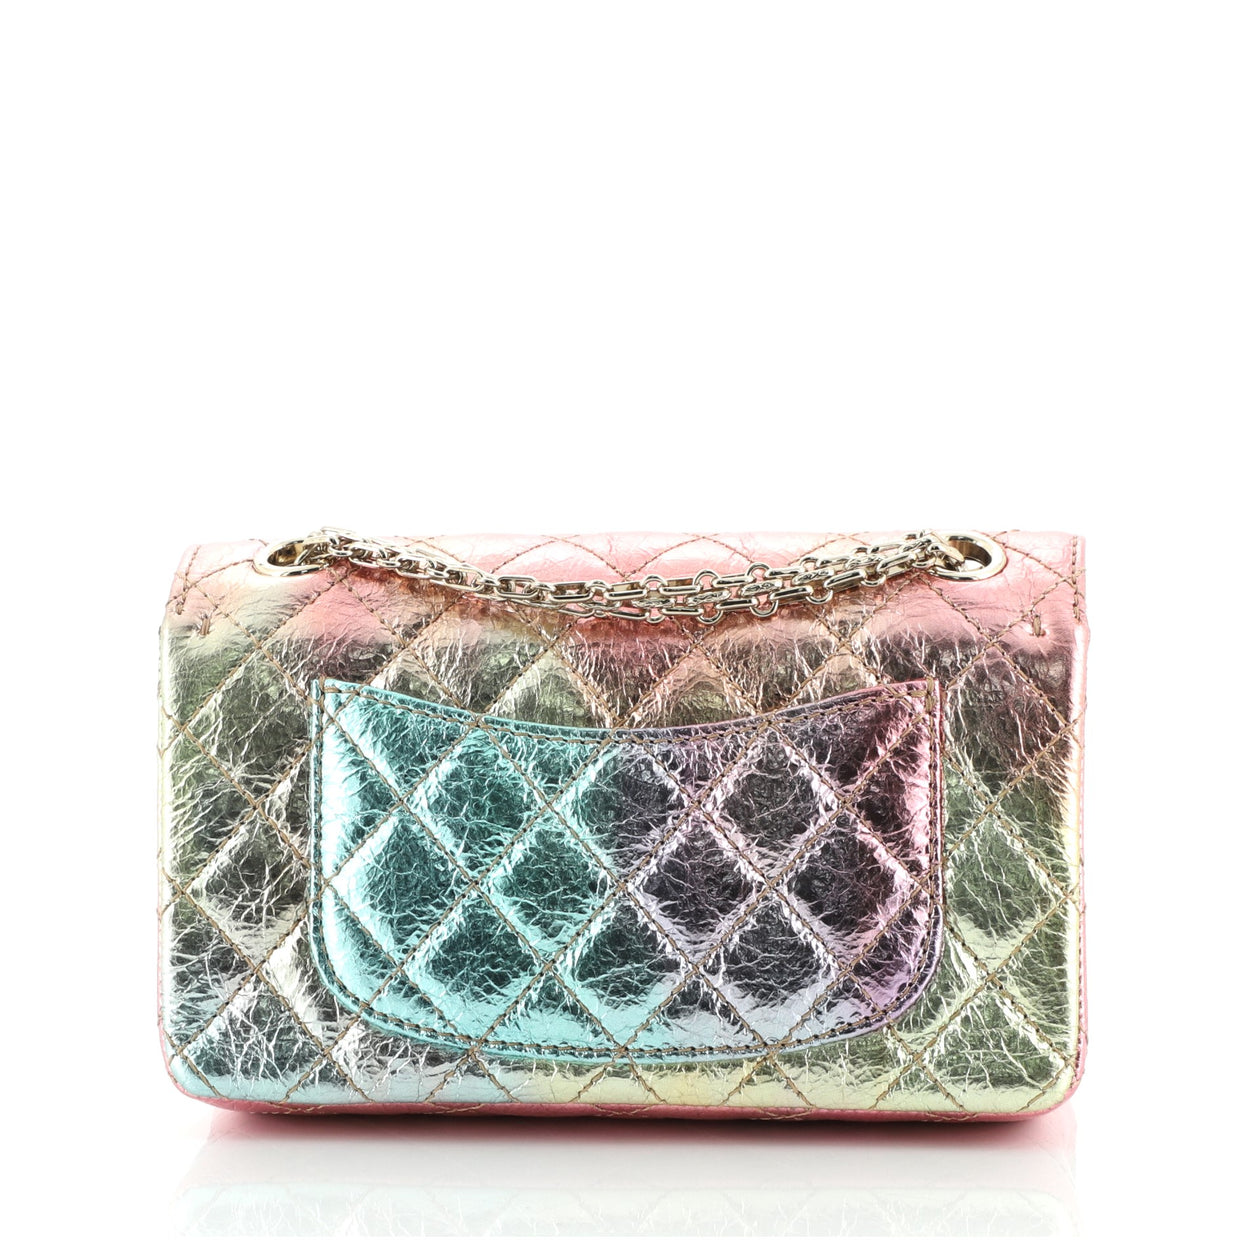 Chanel Rainbow Reissue 2.55 Flap Bag Quilted Multicolor Metallic ...